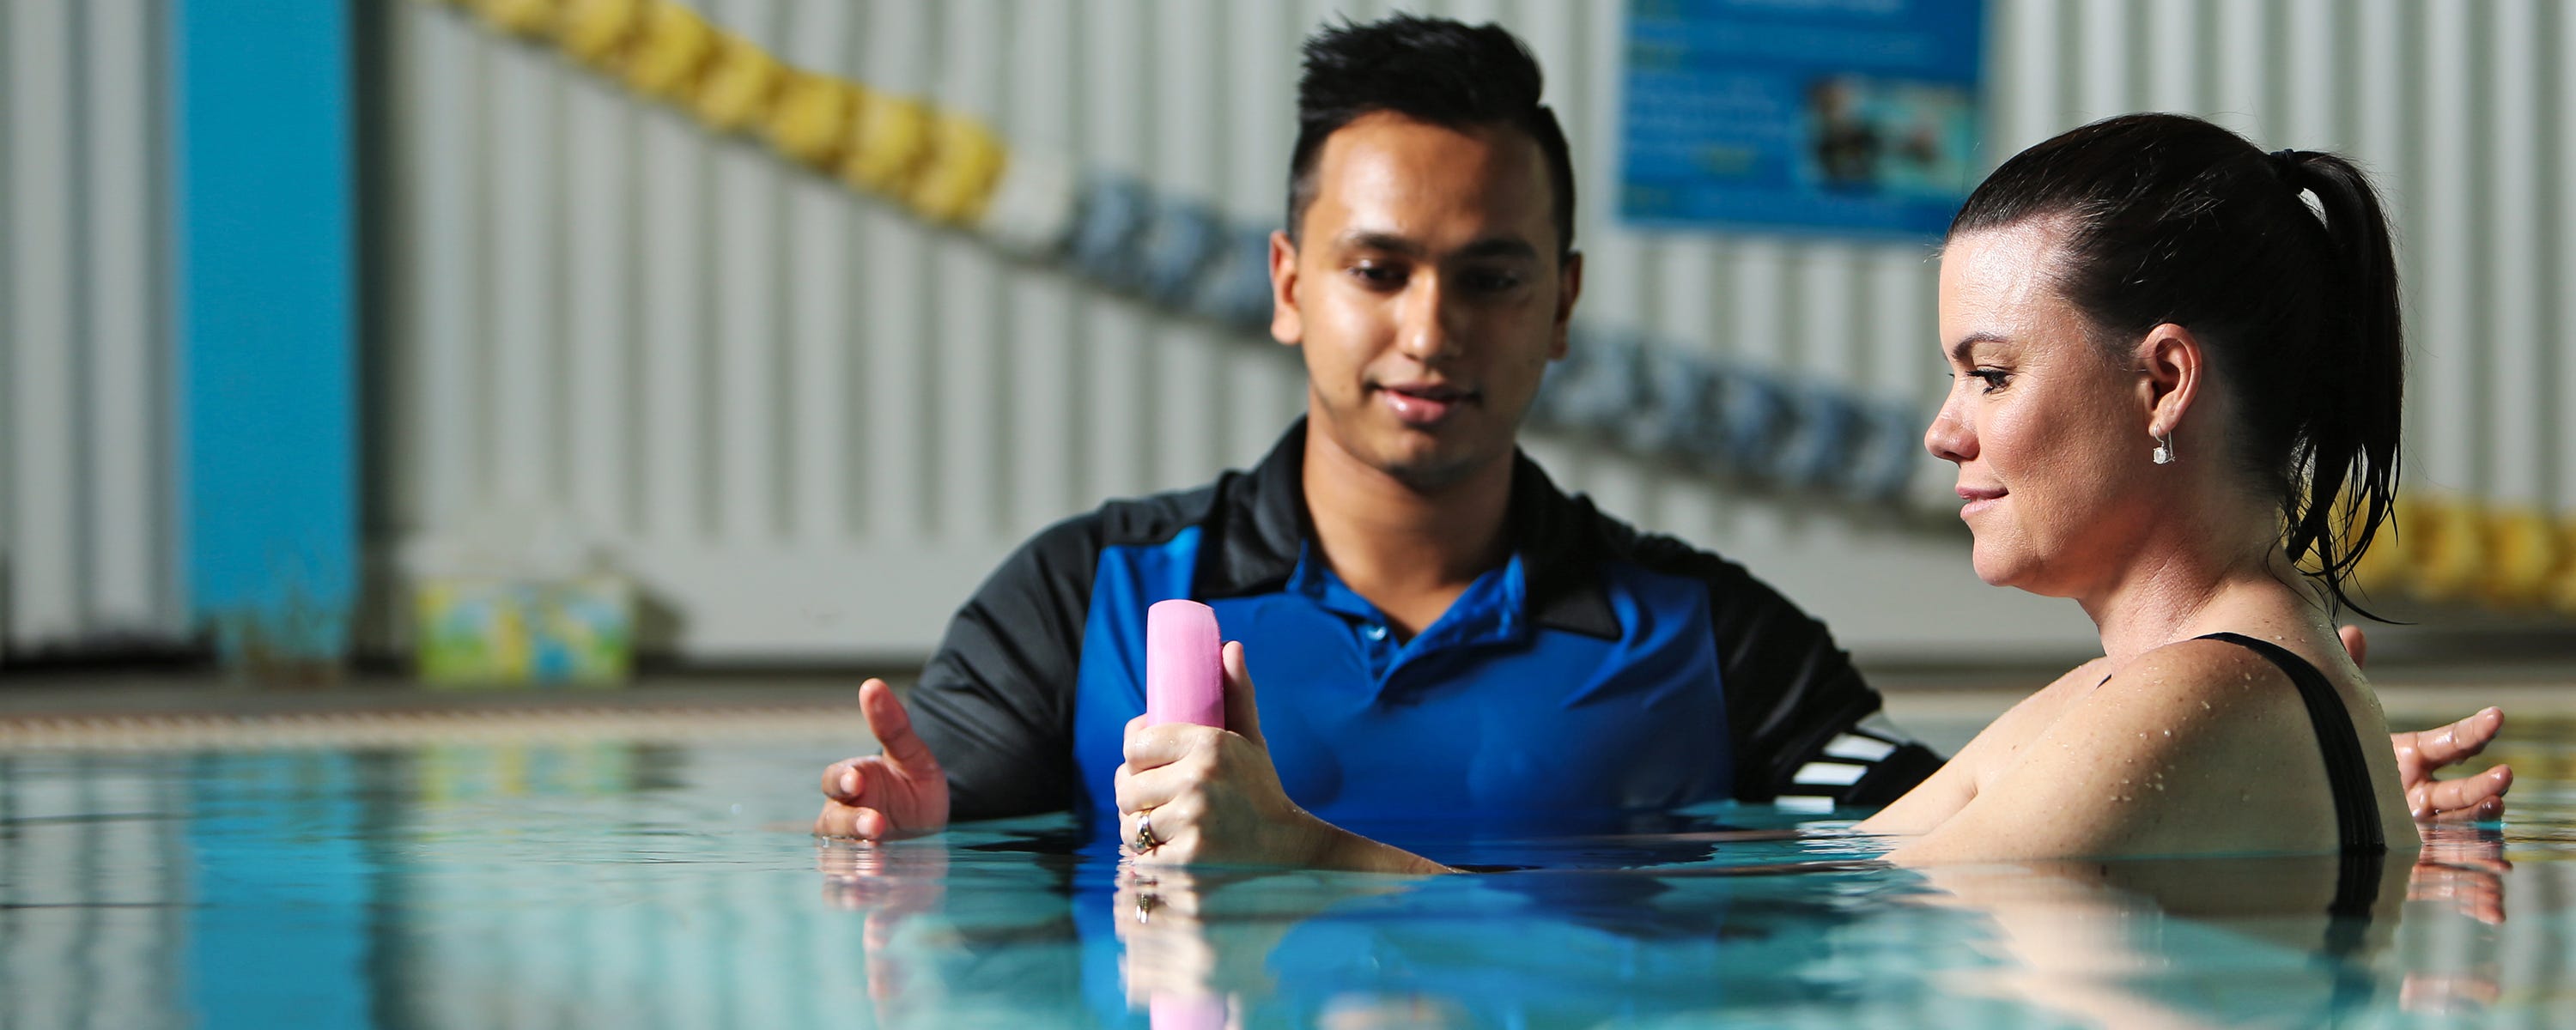 hydrotherapy for plantar fasciitis